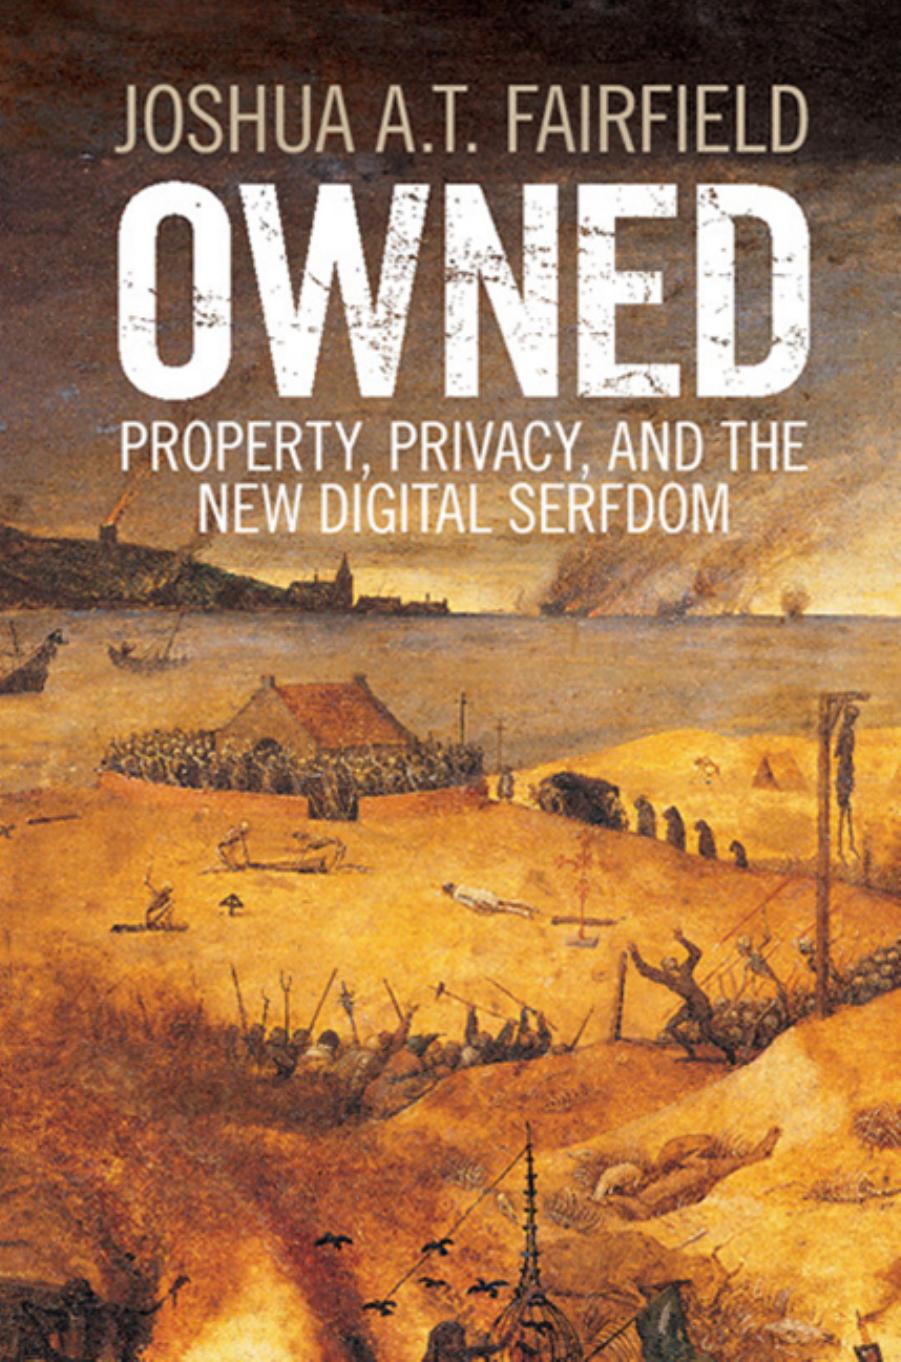 Owned: Property, Privacy, and the New Digital Serfdom by Joshua A. T. Fairfield